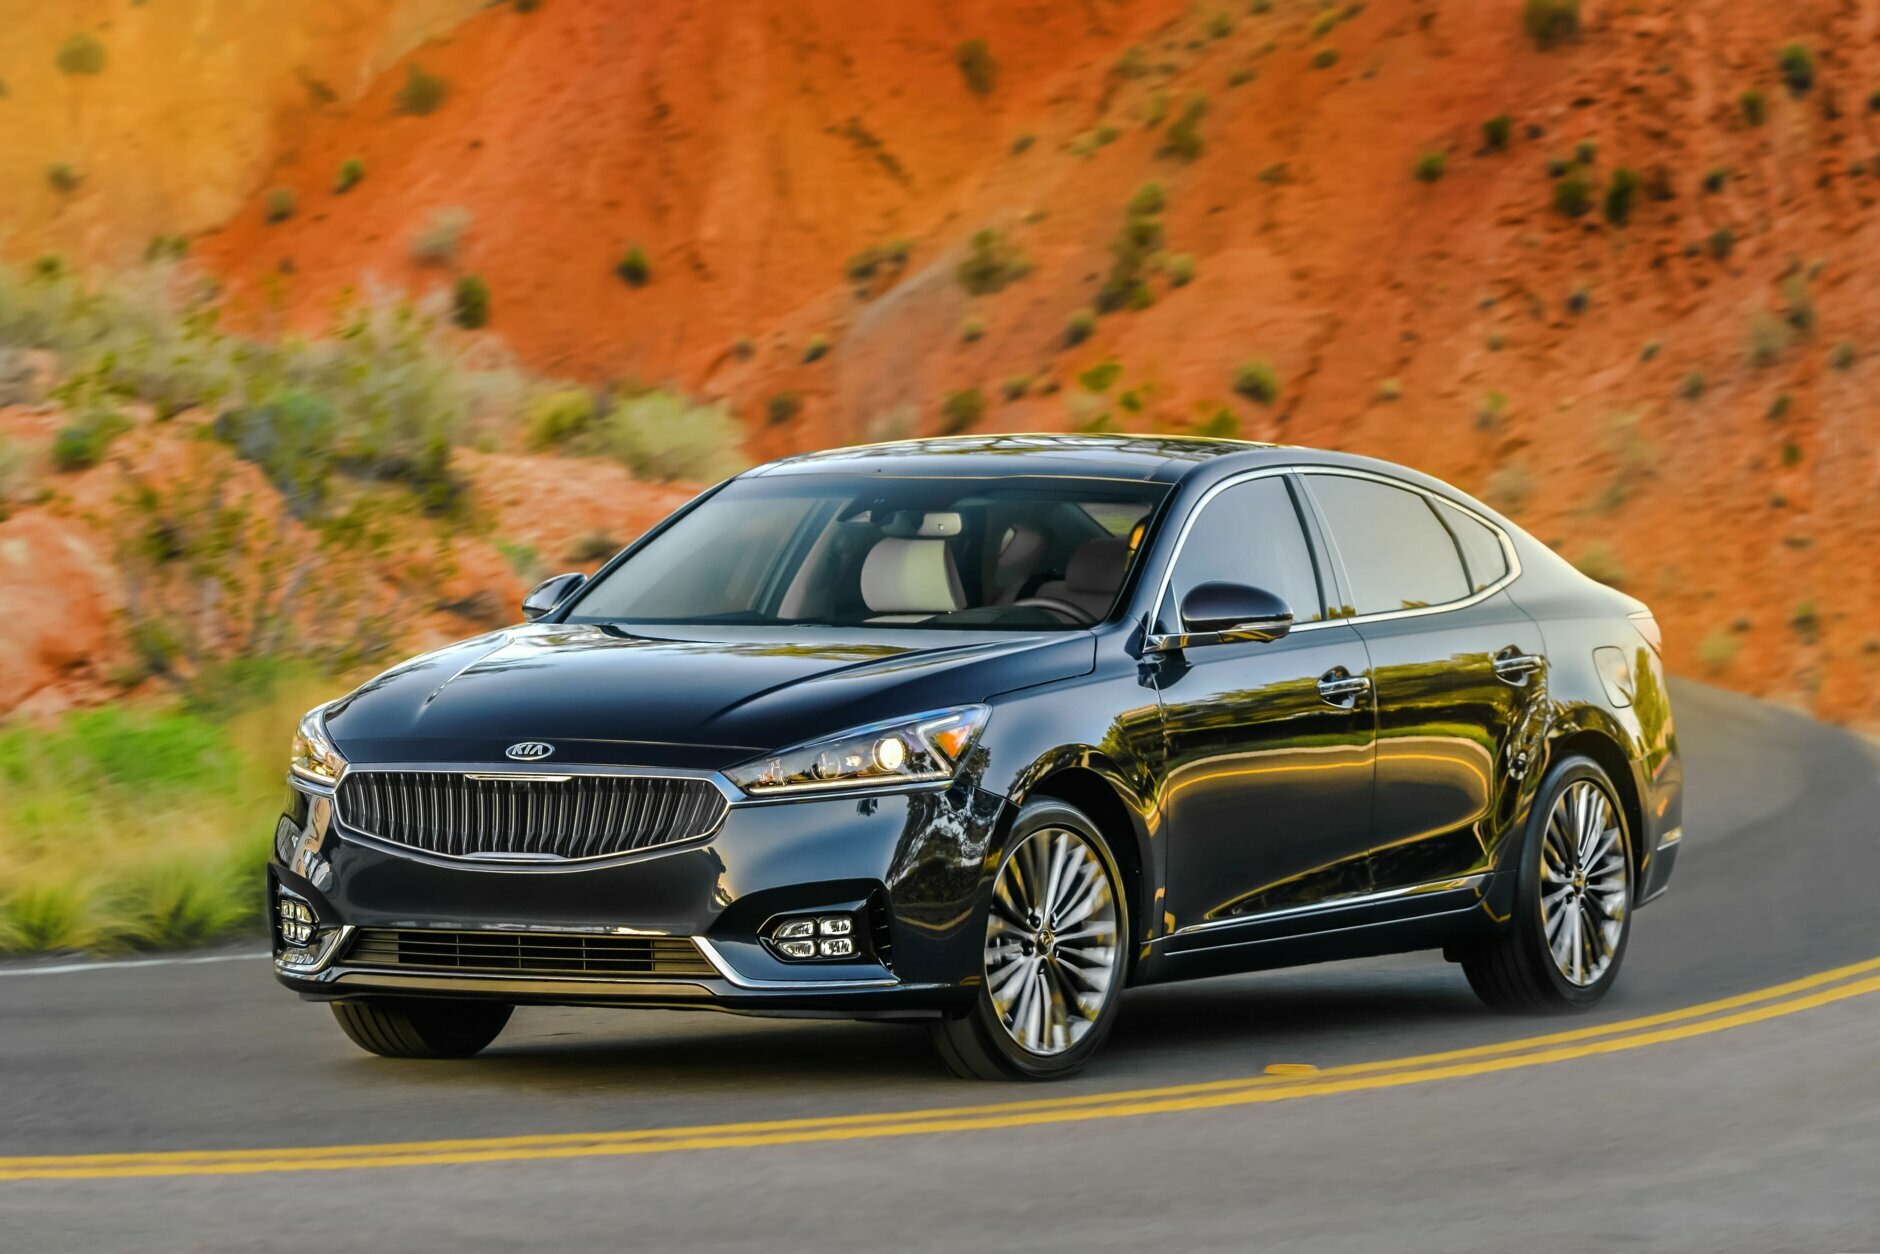 <p><strong>Best large used car for teens:</strong> The 2017 Kia Cadenza</p>
